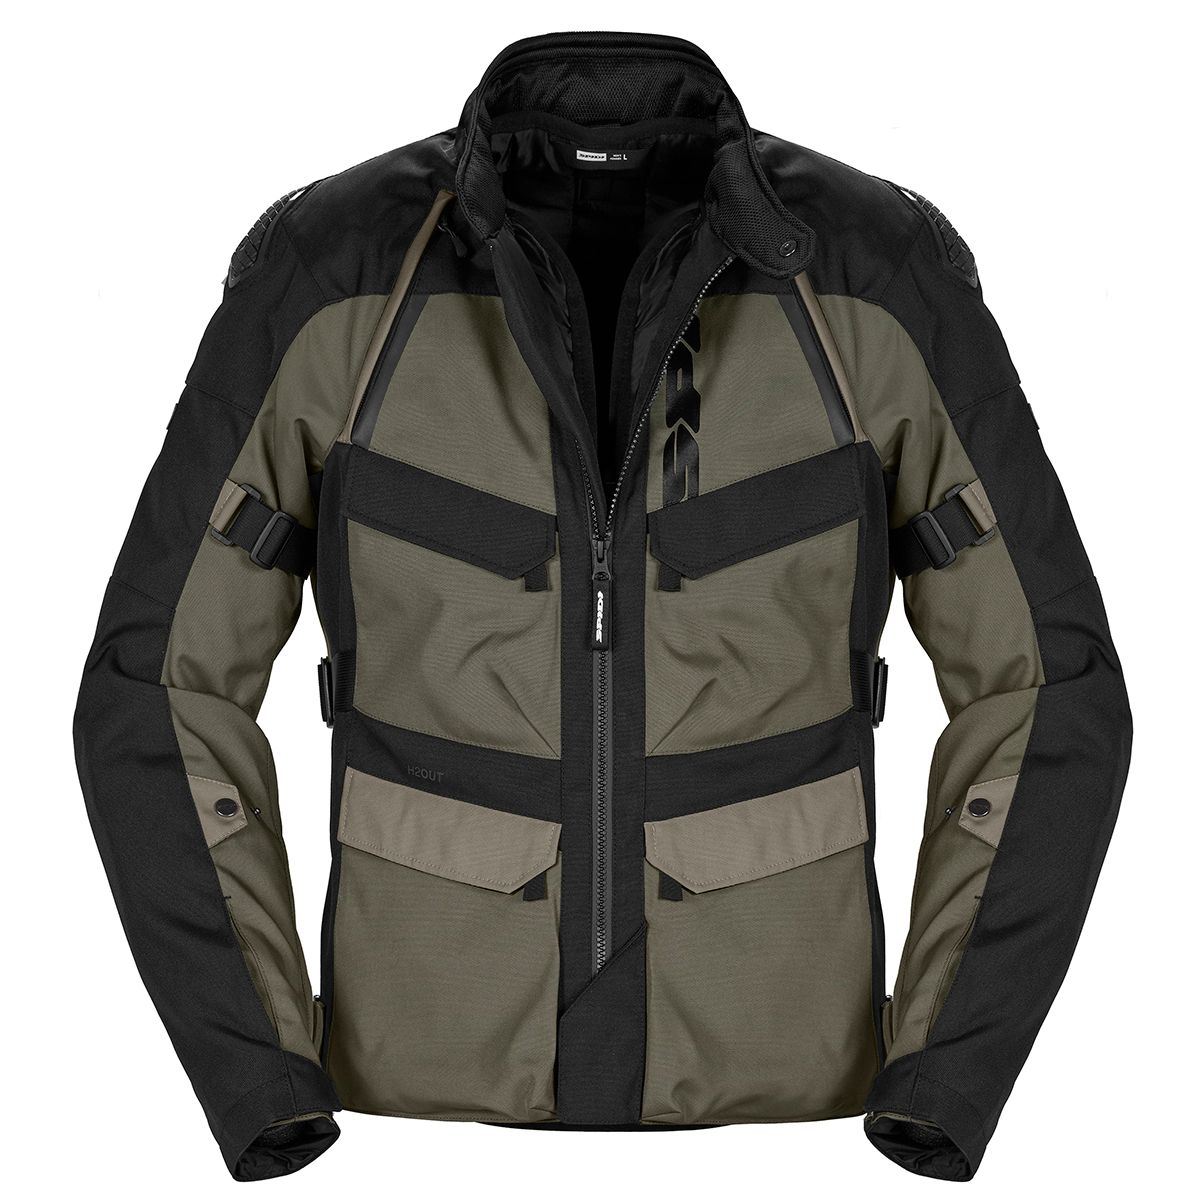 Image of Spidi Rw H2Out Jacket Militar Size M ID 8030161475883